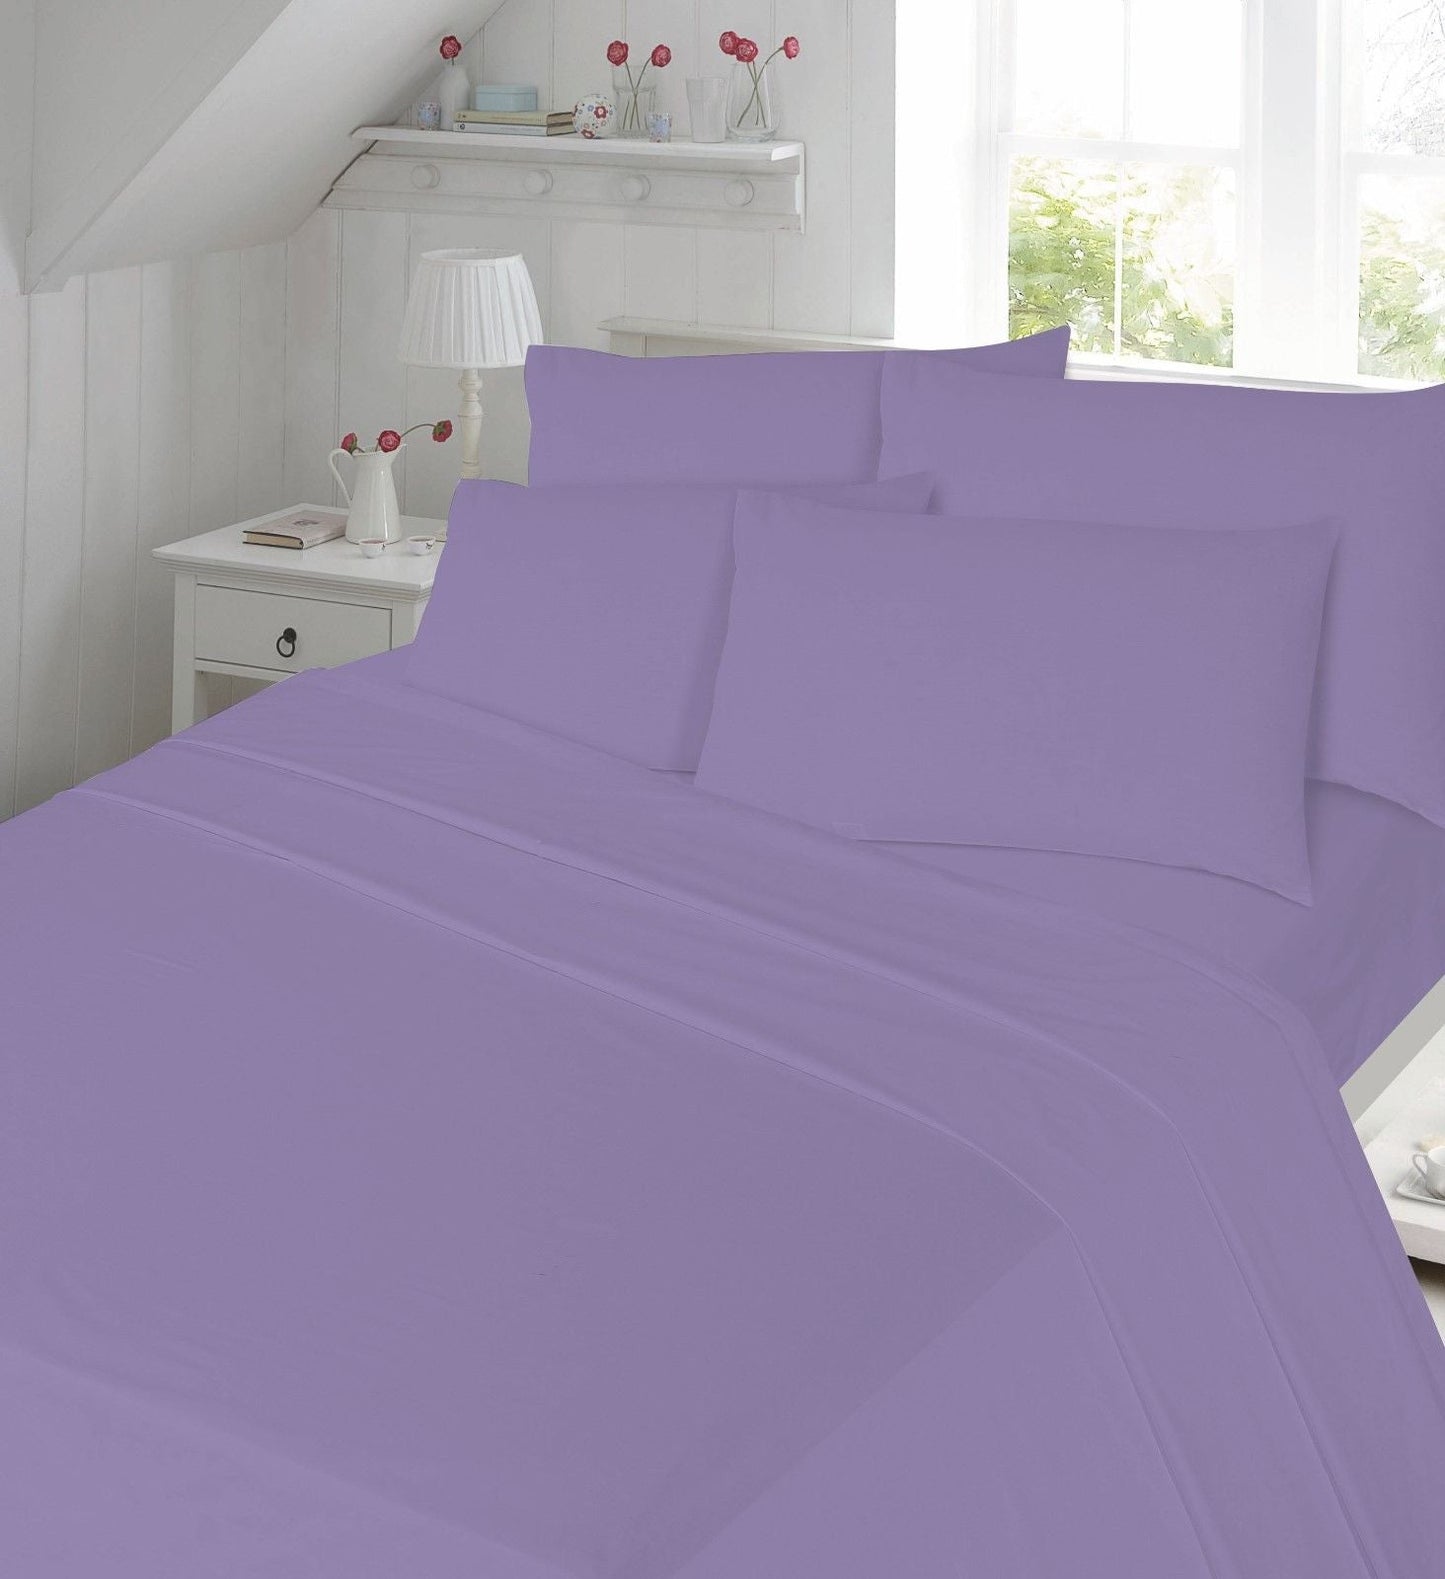 Flannelette Fitted Sheet Cotton Thermal With FREE MATCHING PILLOWCASE - TheComfortshop.co.ukBed Sheets0721718966517thecomfortshopTheComfortshop.co.ukFLNT FIT FREE PP Lilac SingleLilacFitted Sheet Single OnlyFlannelette Fitted Sheet Cotton Thermal With FREE MATCHING PILLOWCASE - TheComfortshop.co.uk